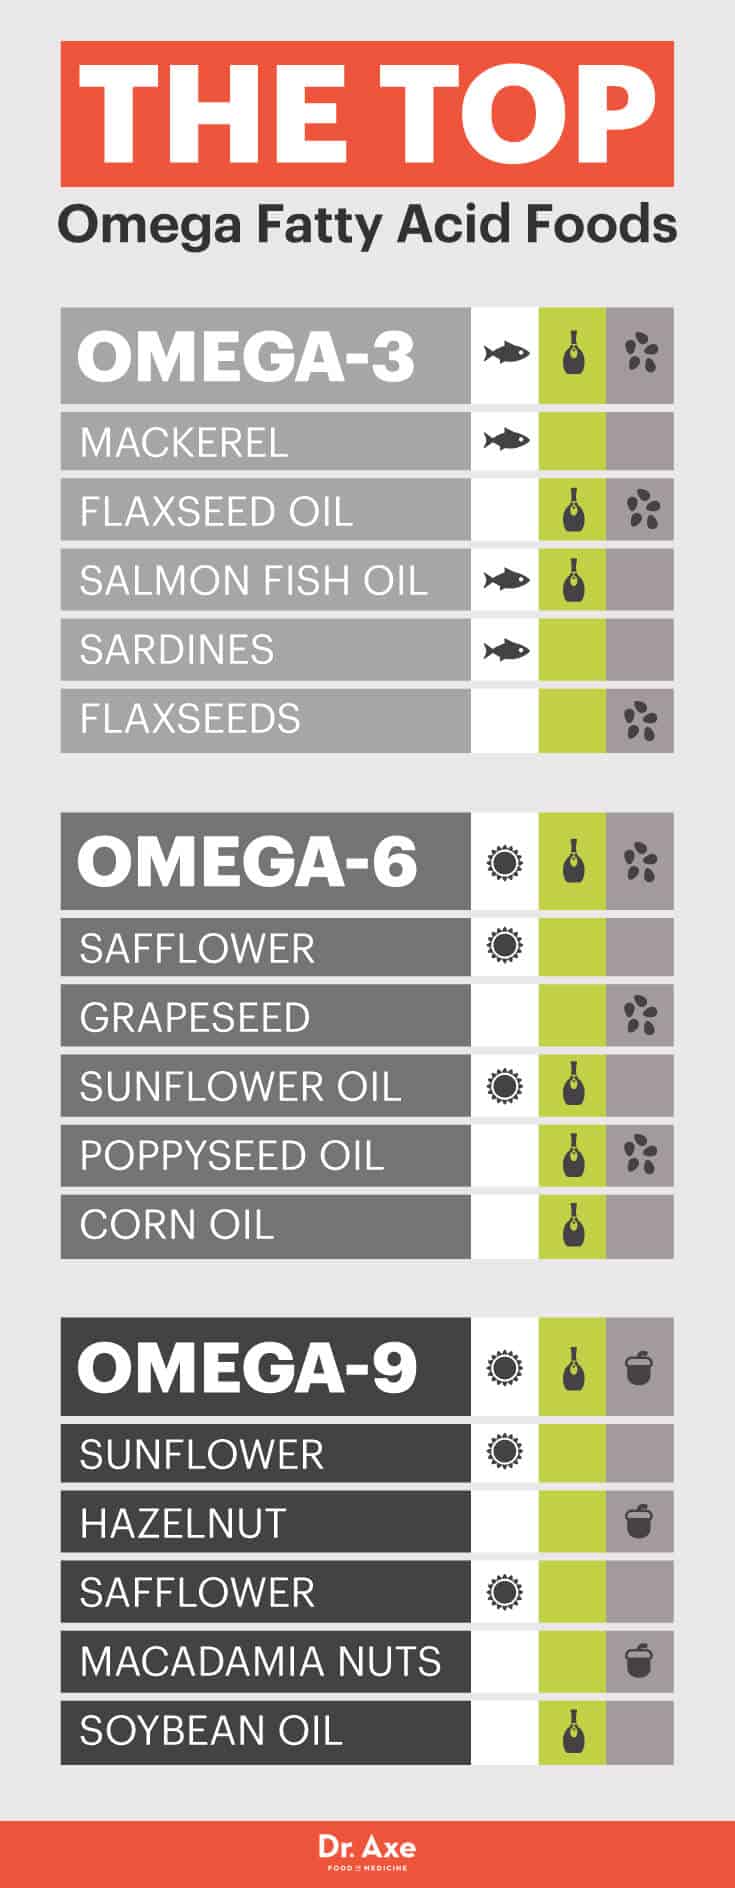 Omega-9 foods - Dr. Axe